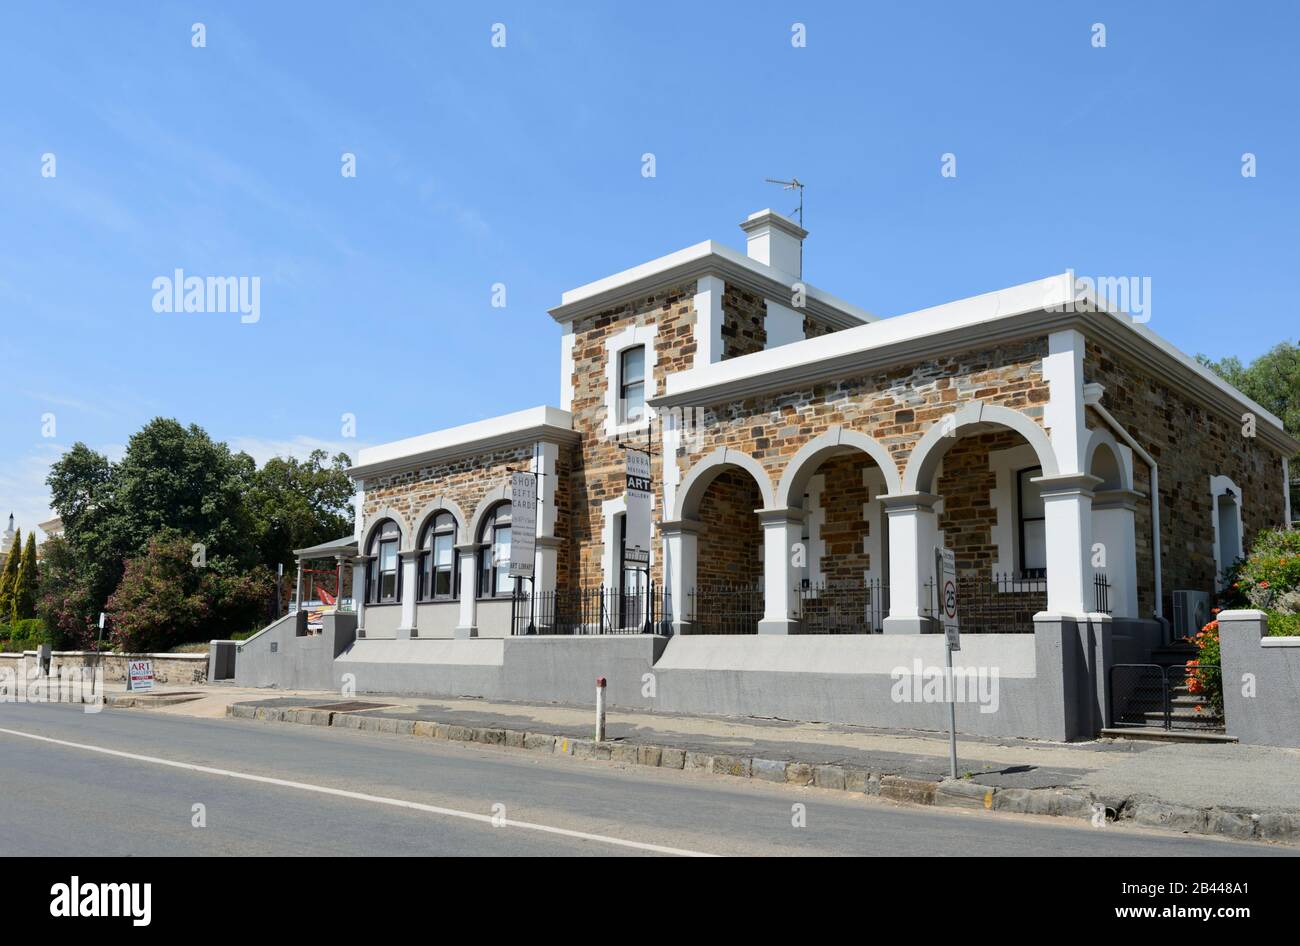 Art gallery building in the small rural town of Burra, a former copper mining town, South Australia, Australia Stock Photo